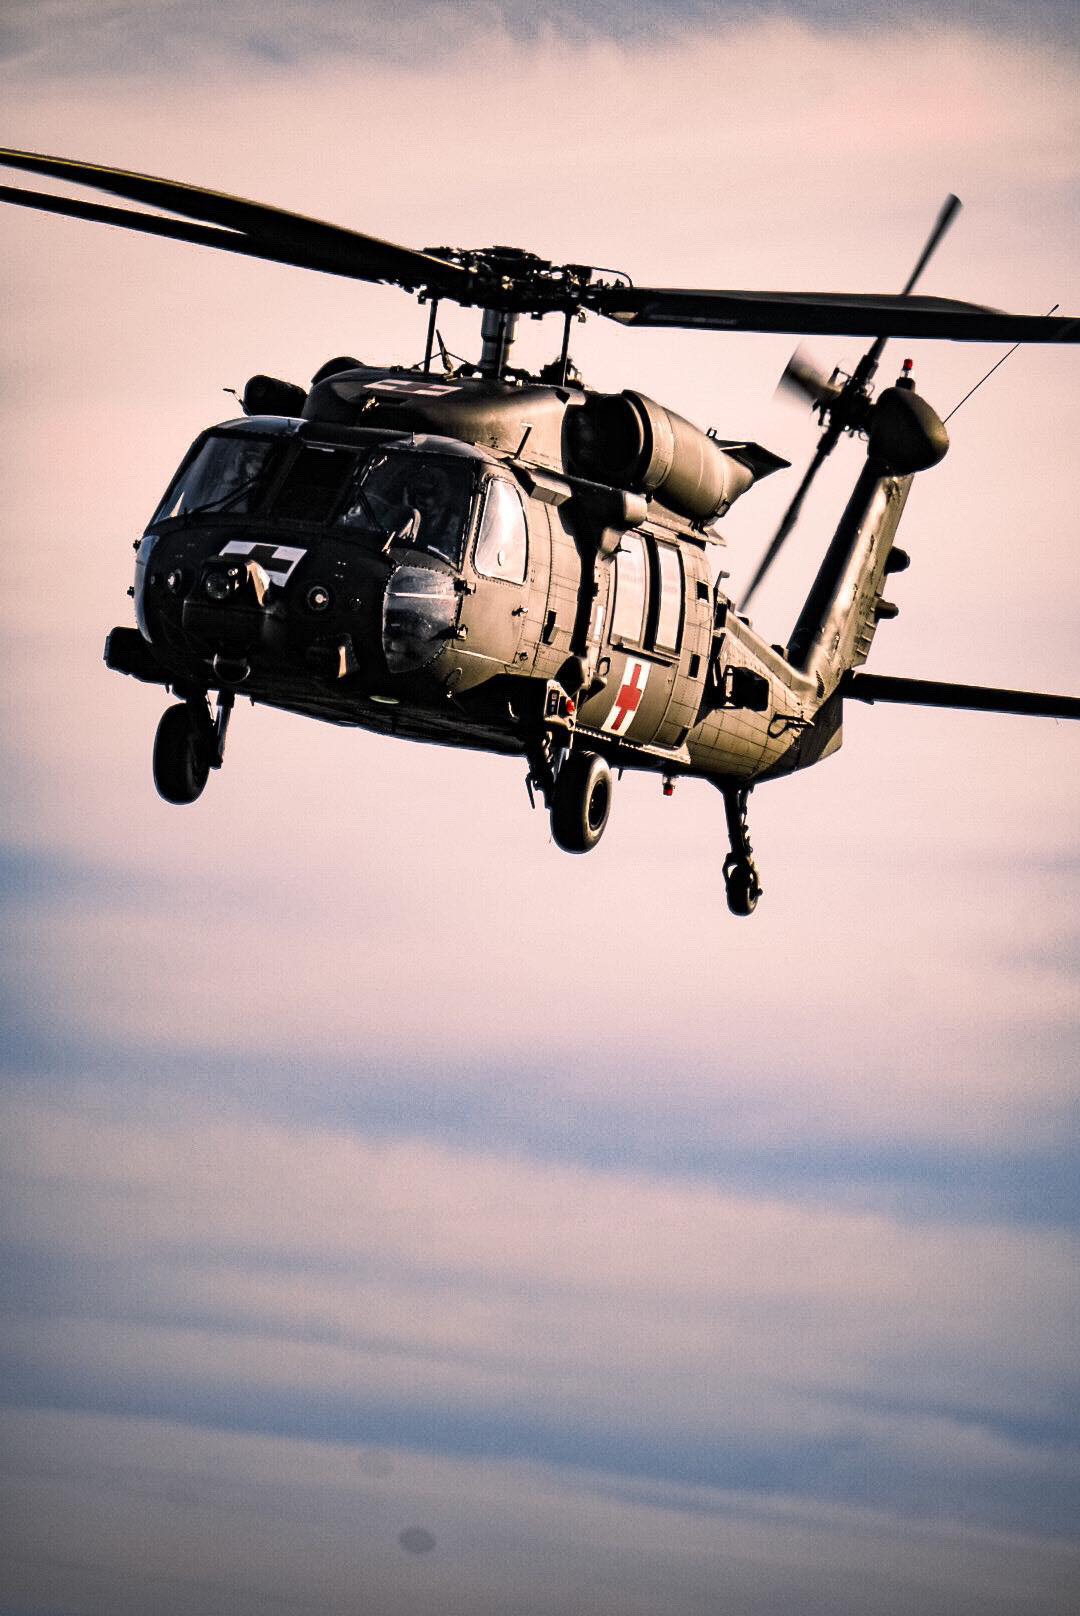 A U.S. Army Sikorsky HH-60M assigned to Lonestar DUSTOFF conducting a flight in Germany. Photo from Javier Arencibia on Facebook